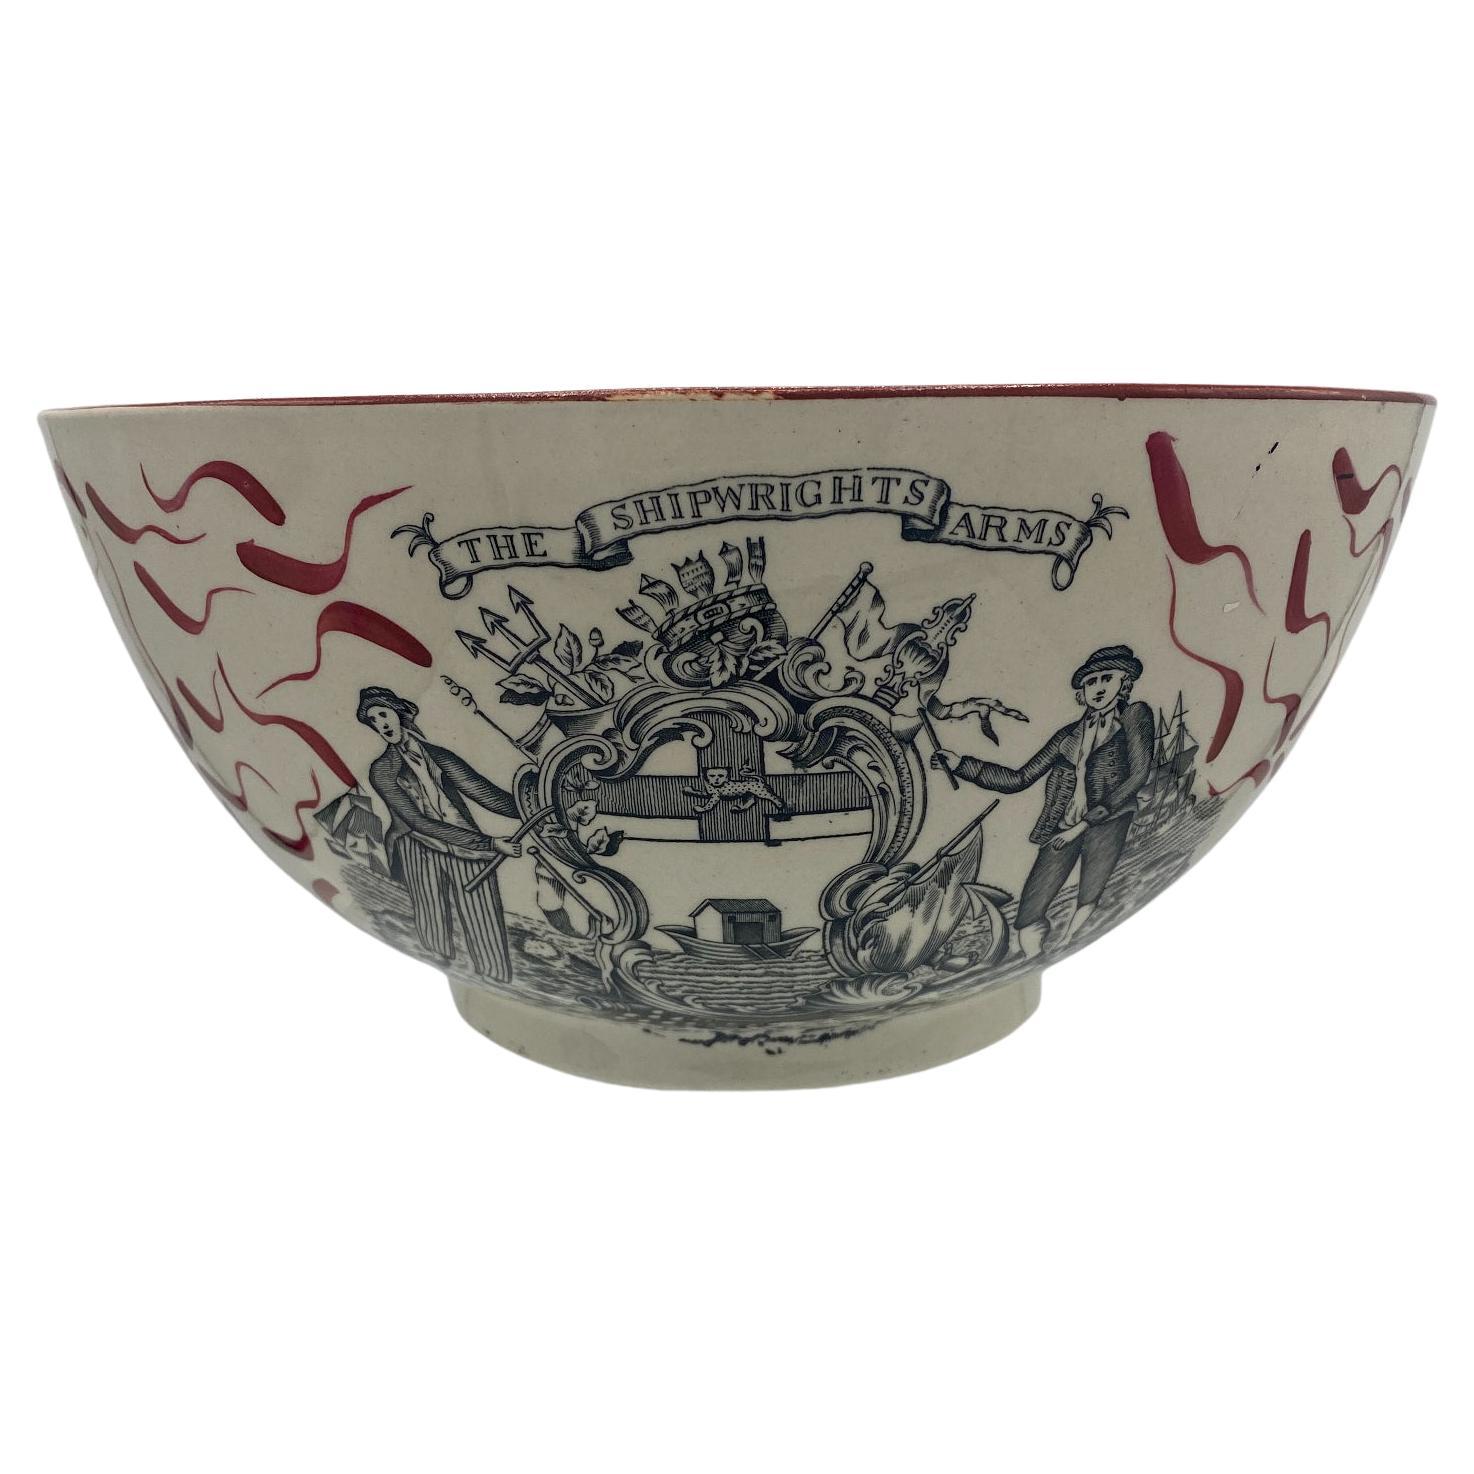 Late 19th Century Adams Pottery John Leach the Shipwrights Arms Ceramic Bowl For Sale